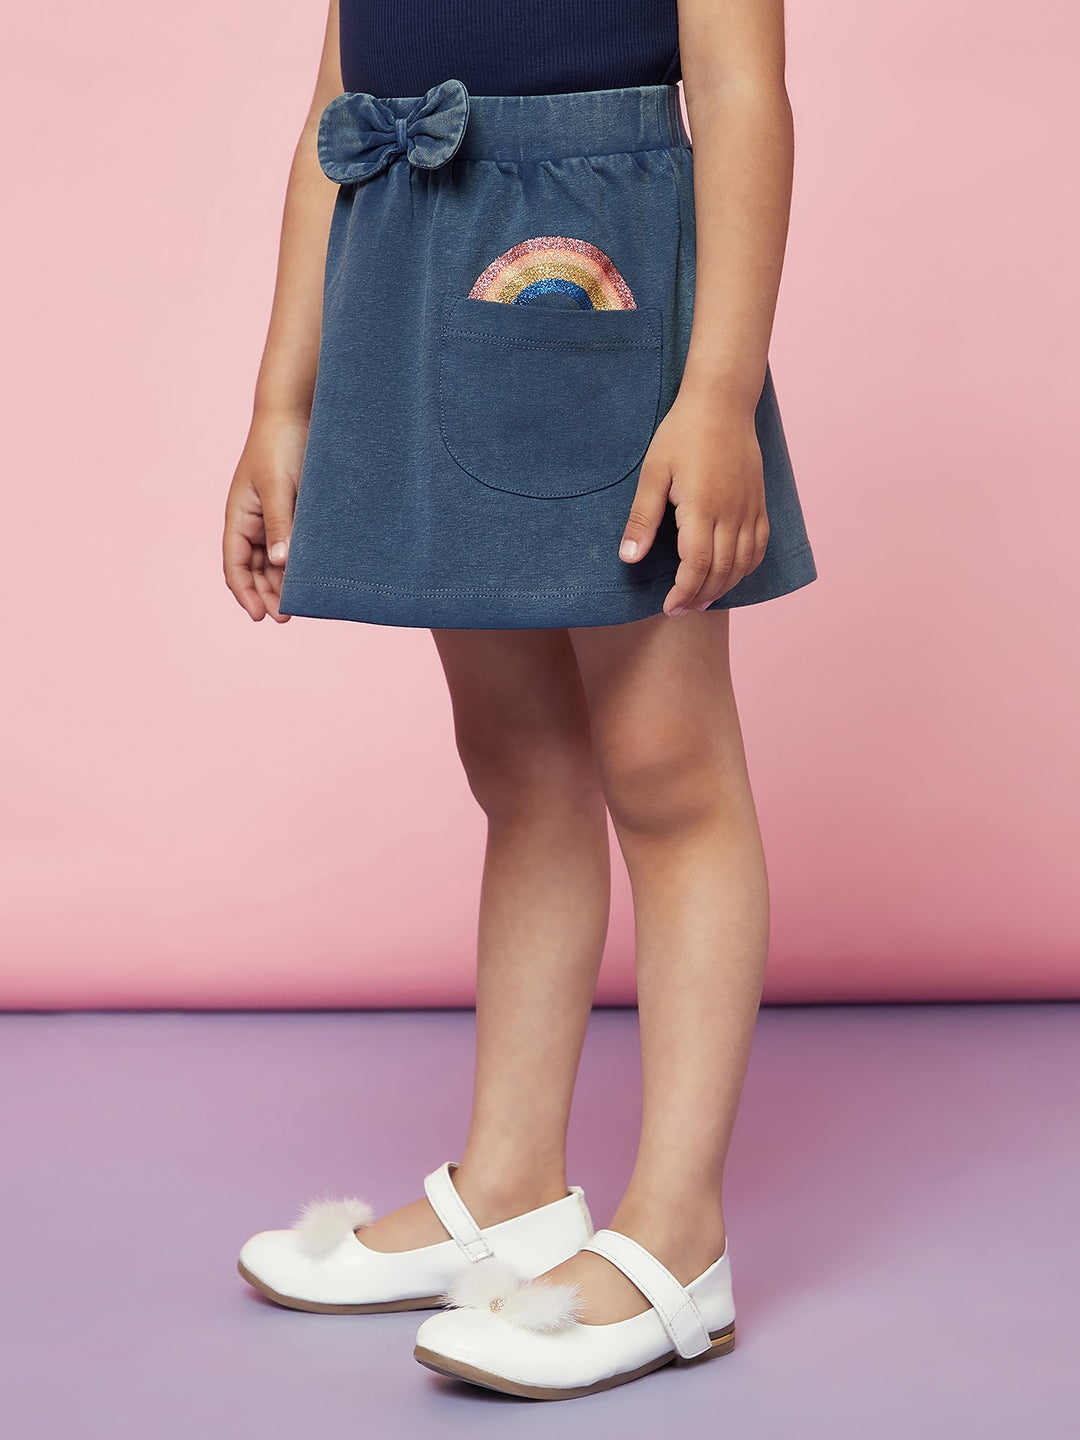 Dance With Clouds Kids Skirt